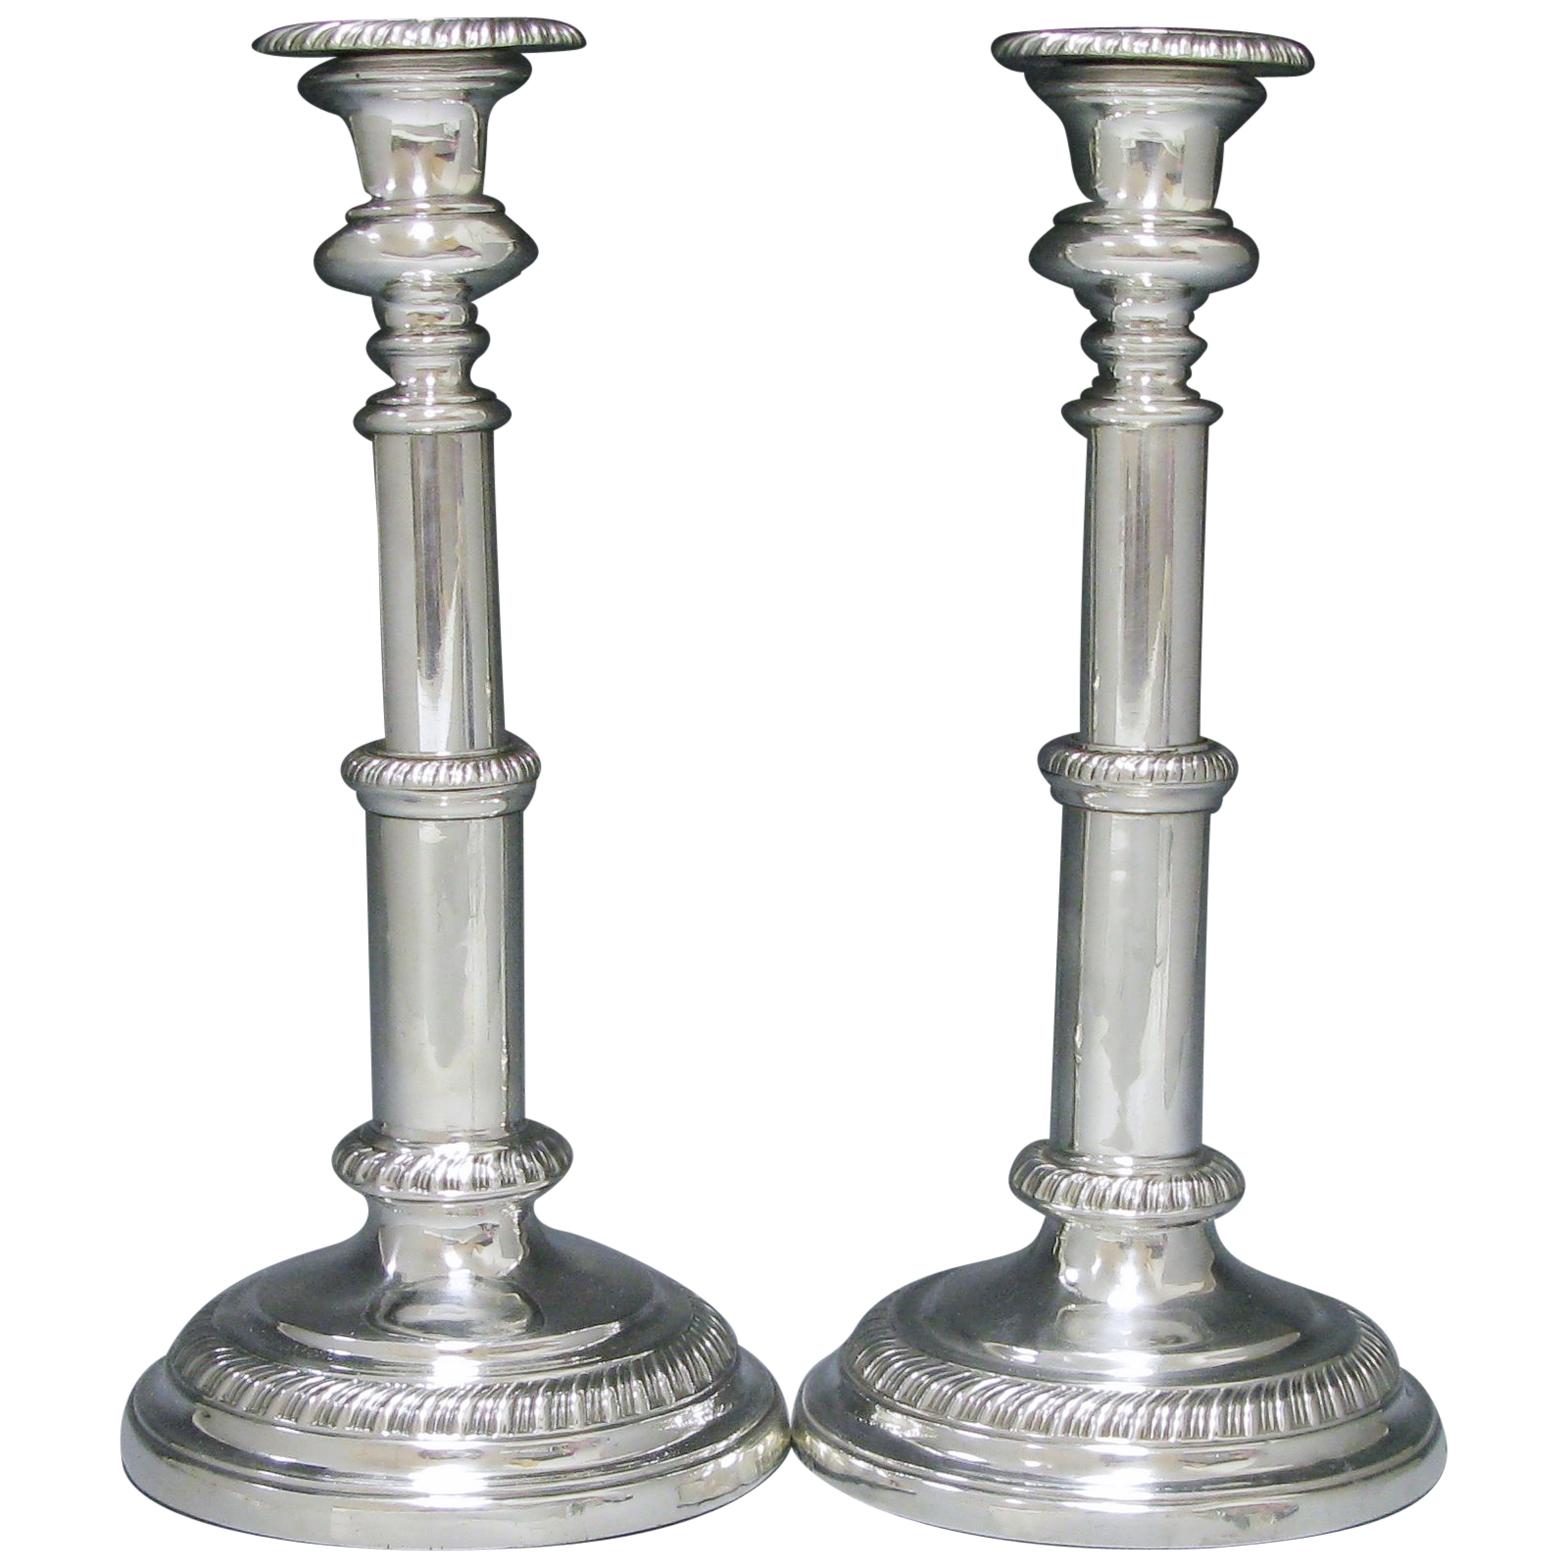 Pair of Rare Antique Silver Telescopic Candlesticks For Sale